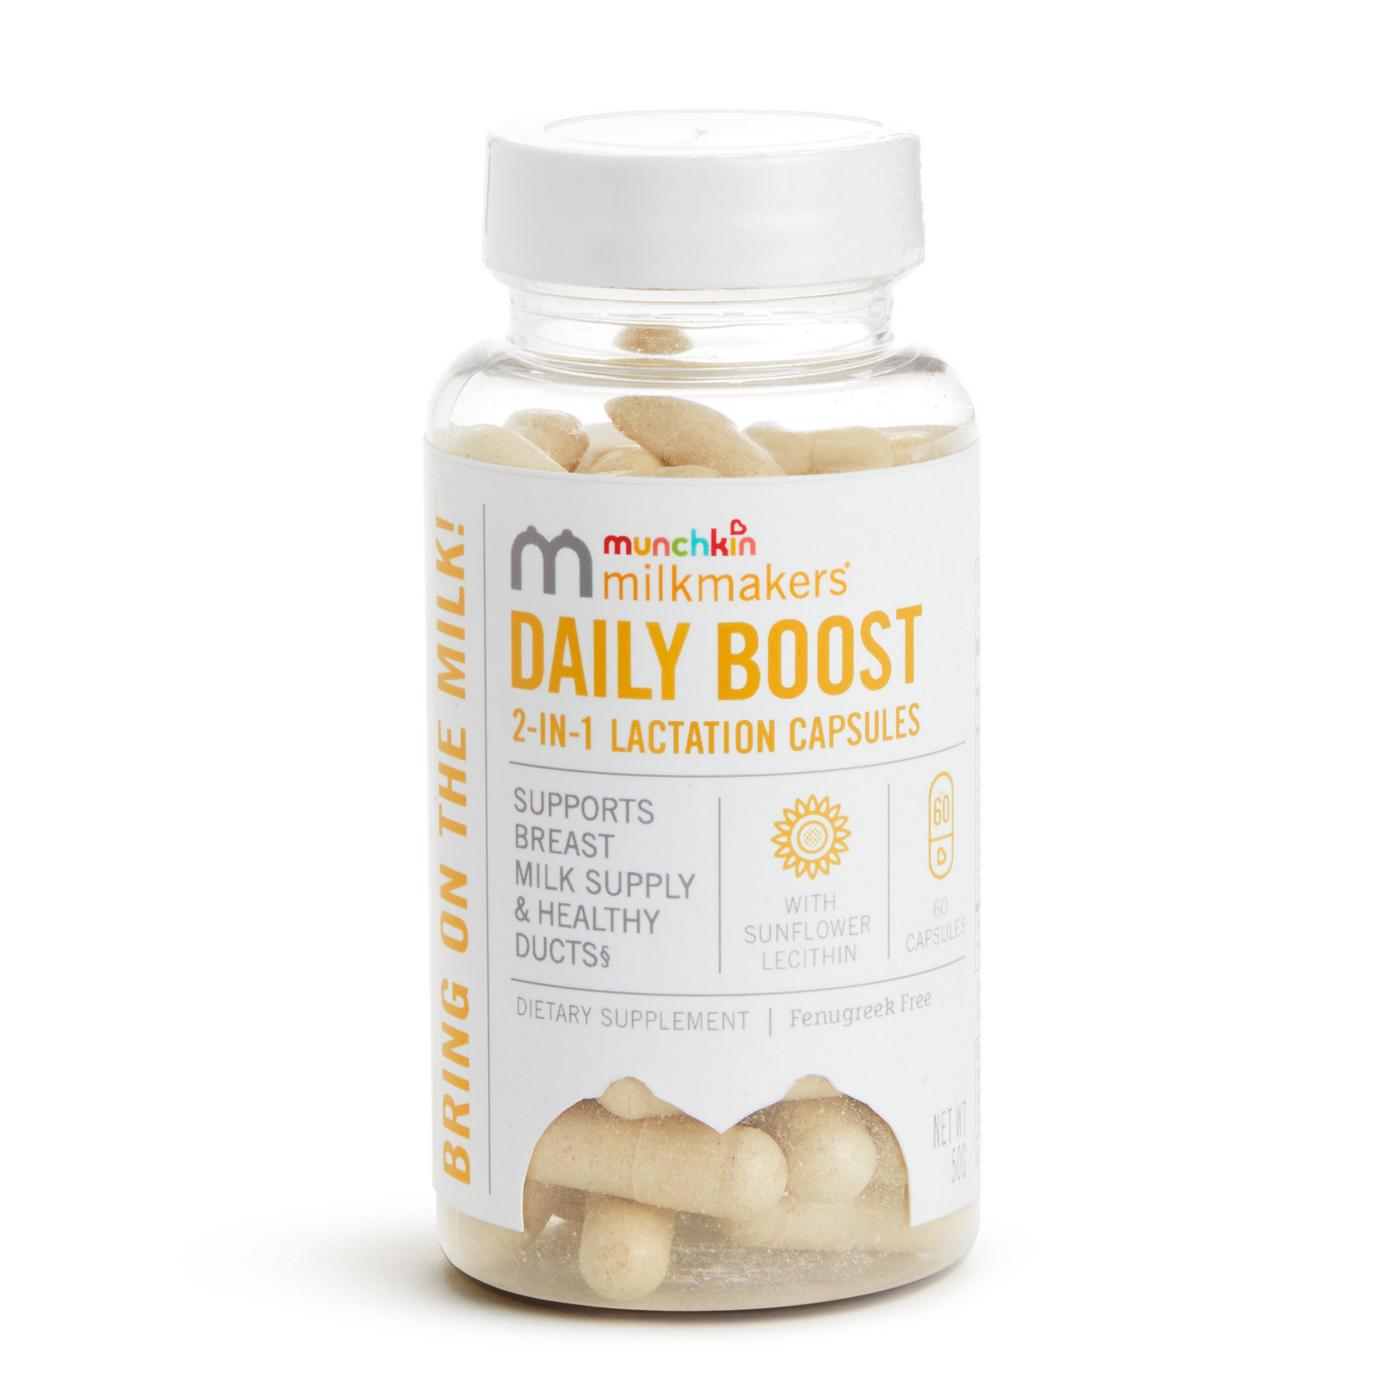 Munchkin Daily Boost 2-IN-1 Lactation Capsules; image 1 of 6